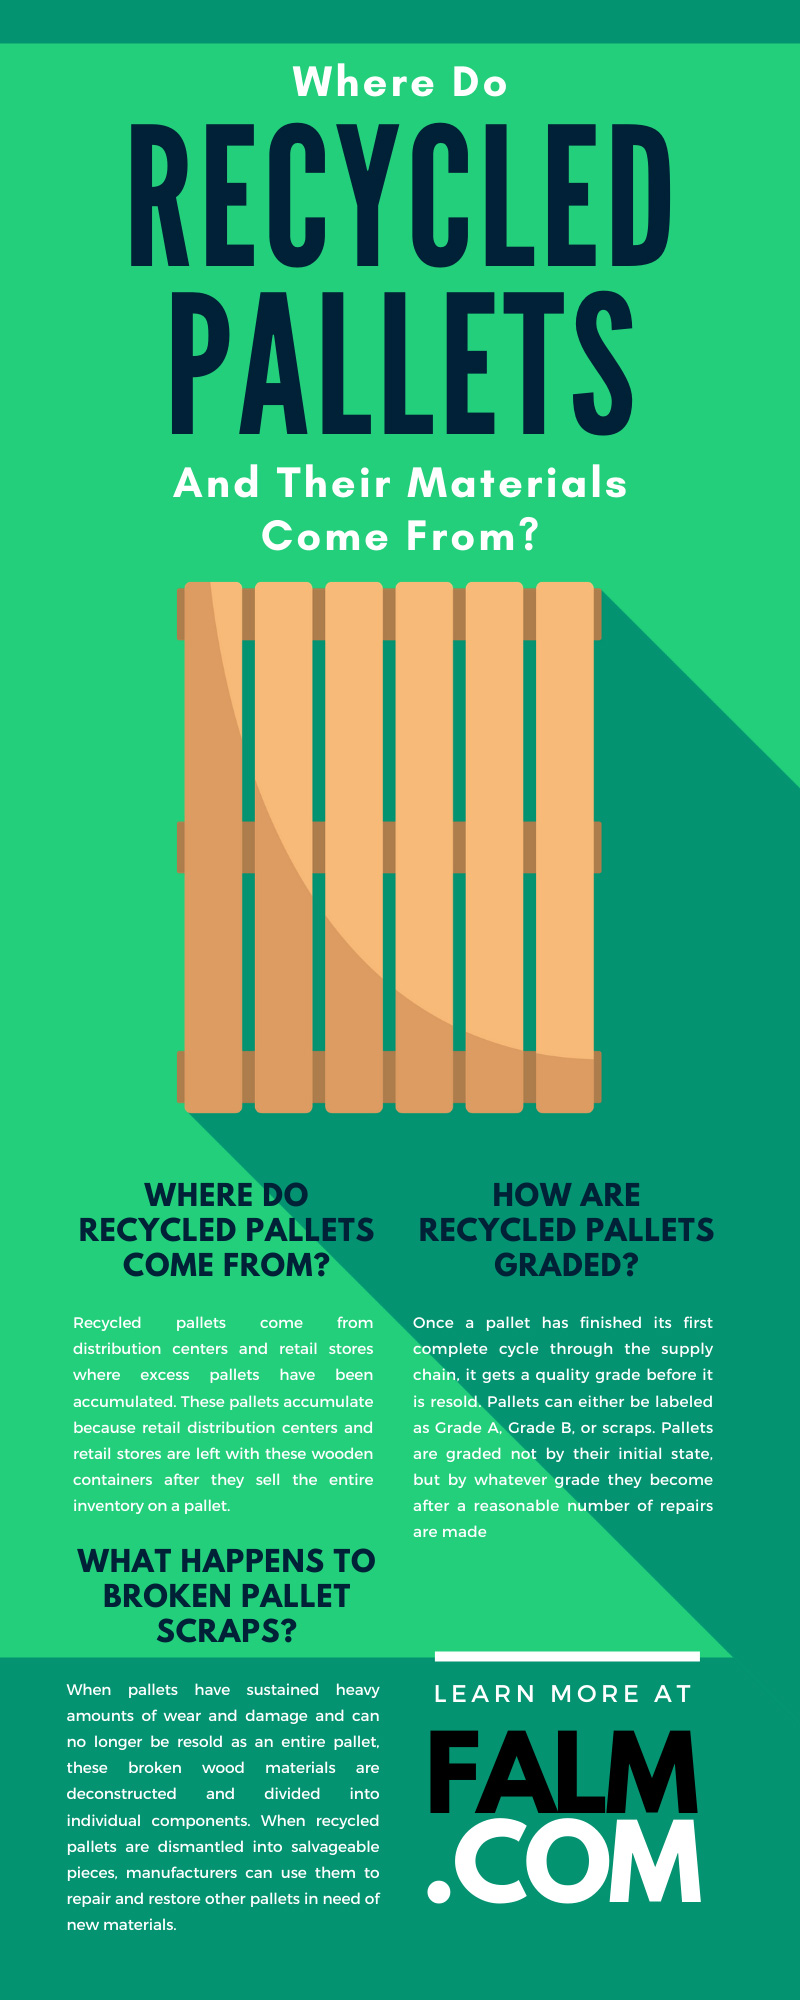 Where Do Recycled Pallets and Their Materials Come From?